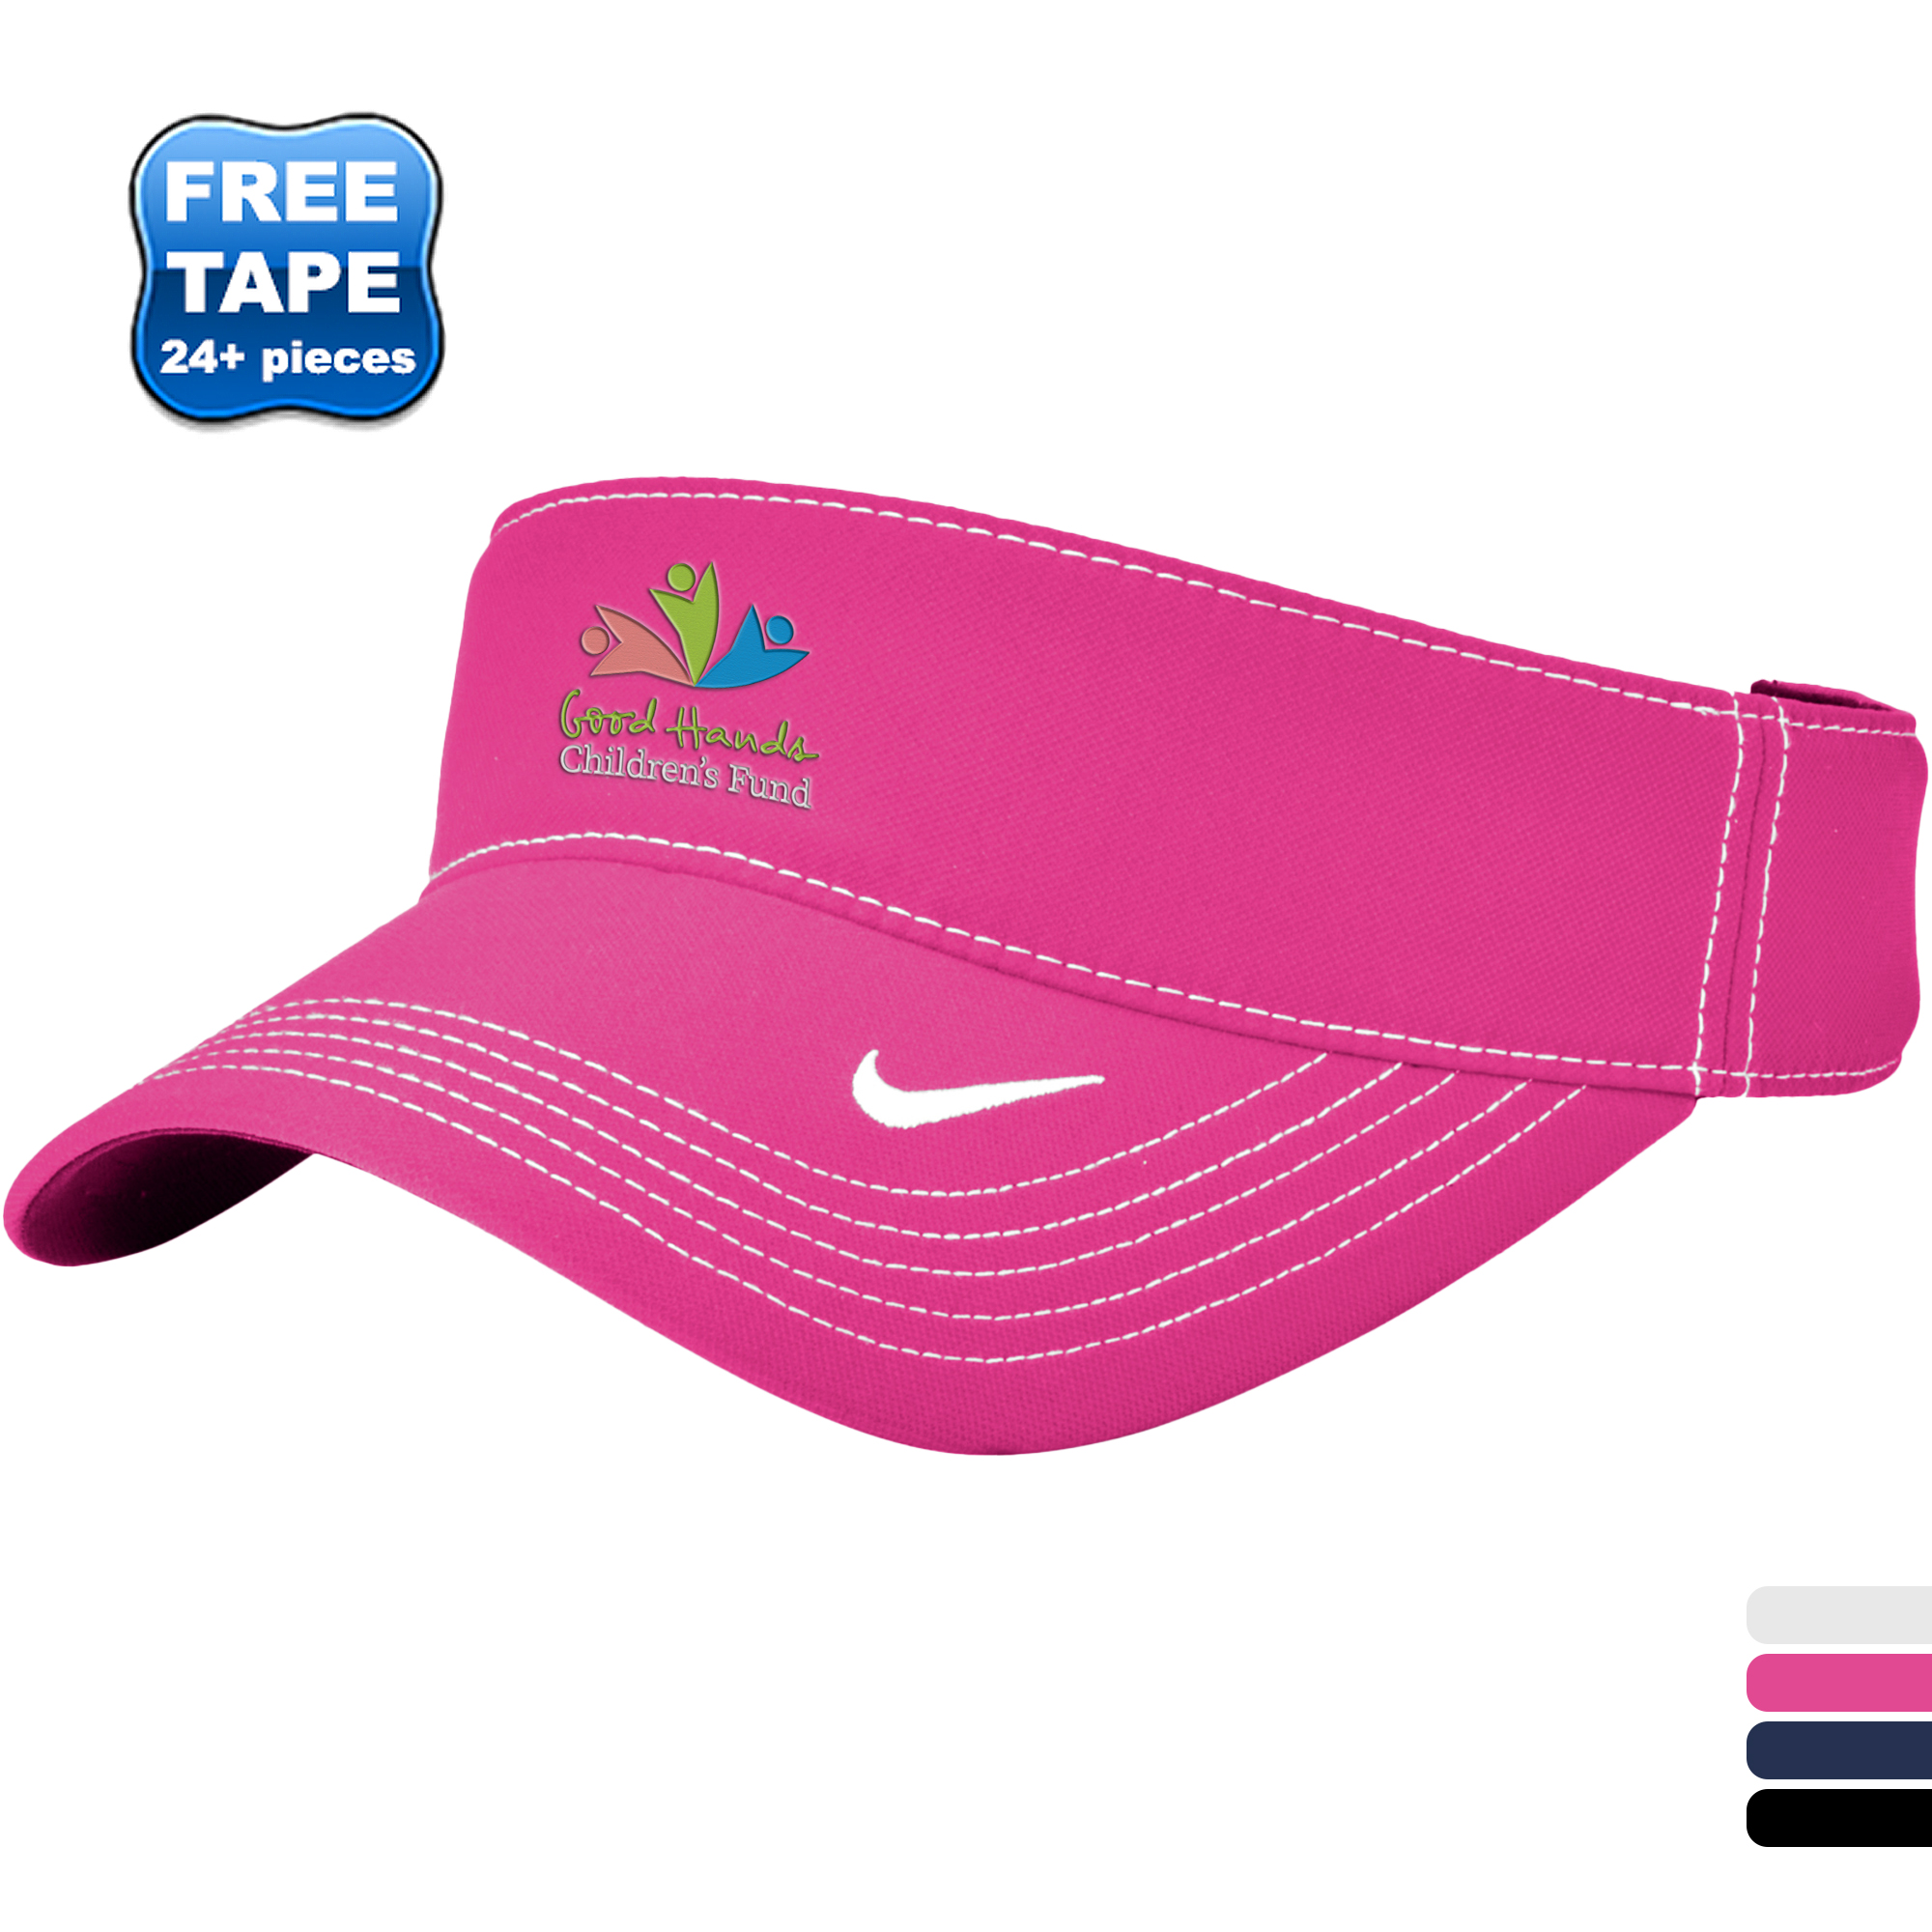 Sunshade hats for men and women - 35134 - IdeaStage Promotional Products